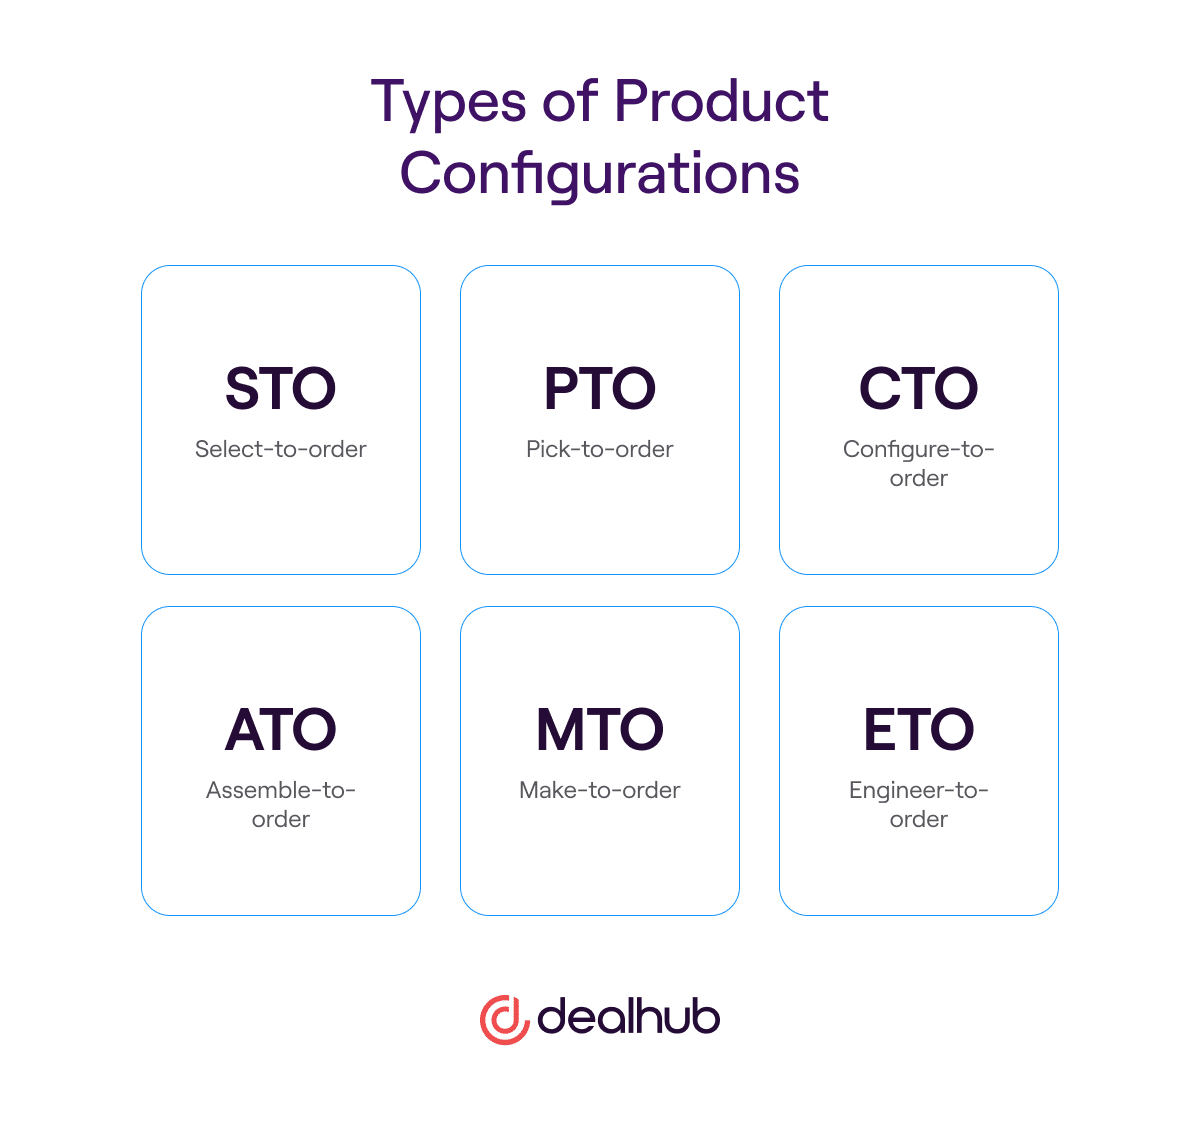 Types of Product Configurations